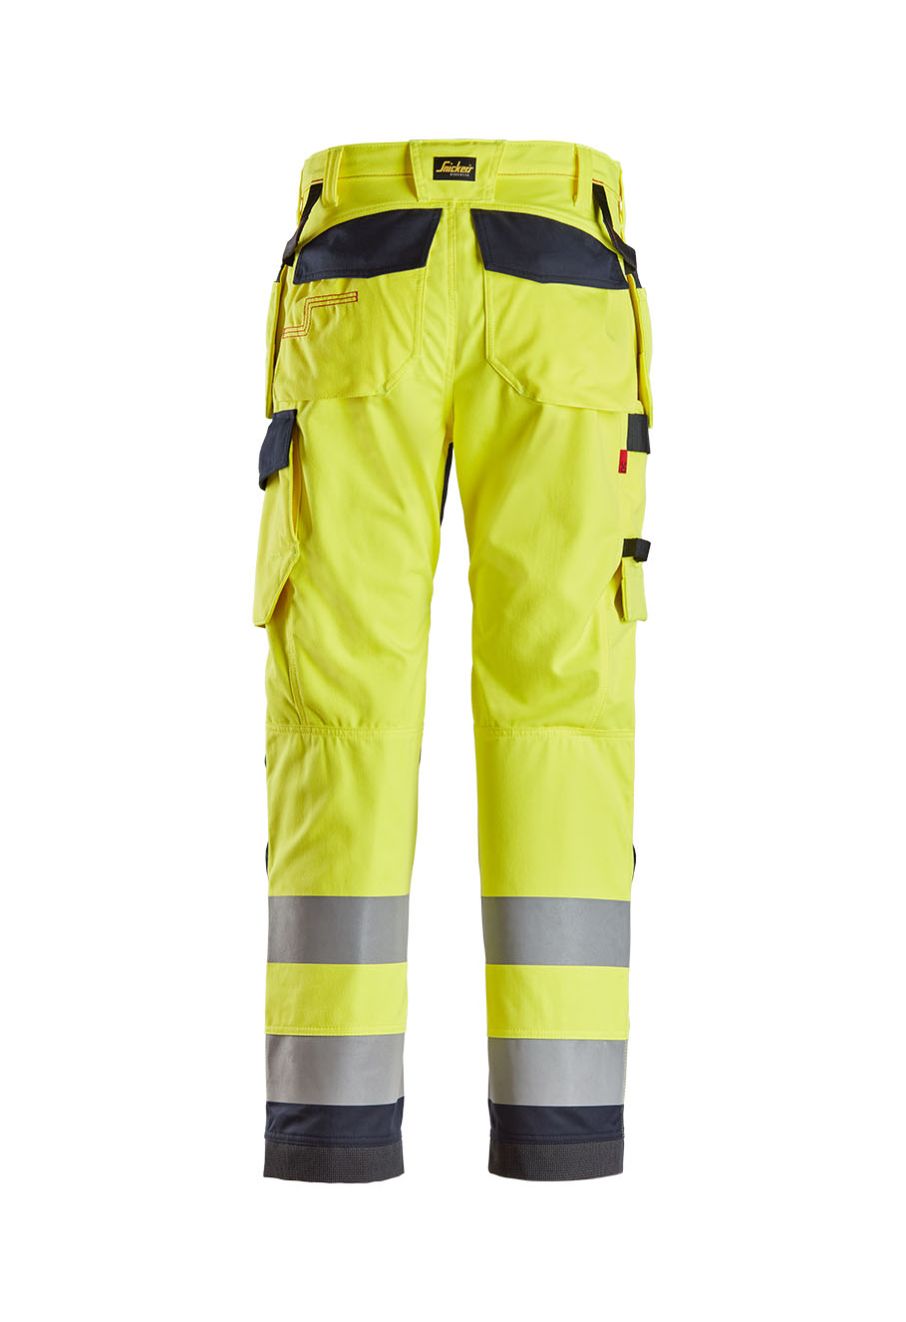 Buy Snickers Workwear 6271 stretch work trousers | Prosafco